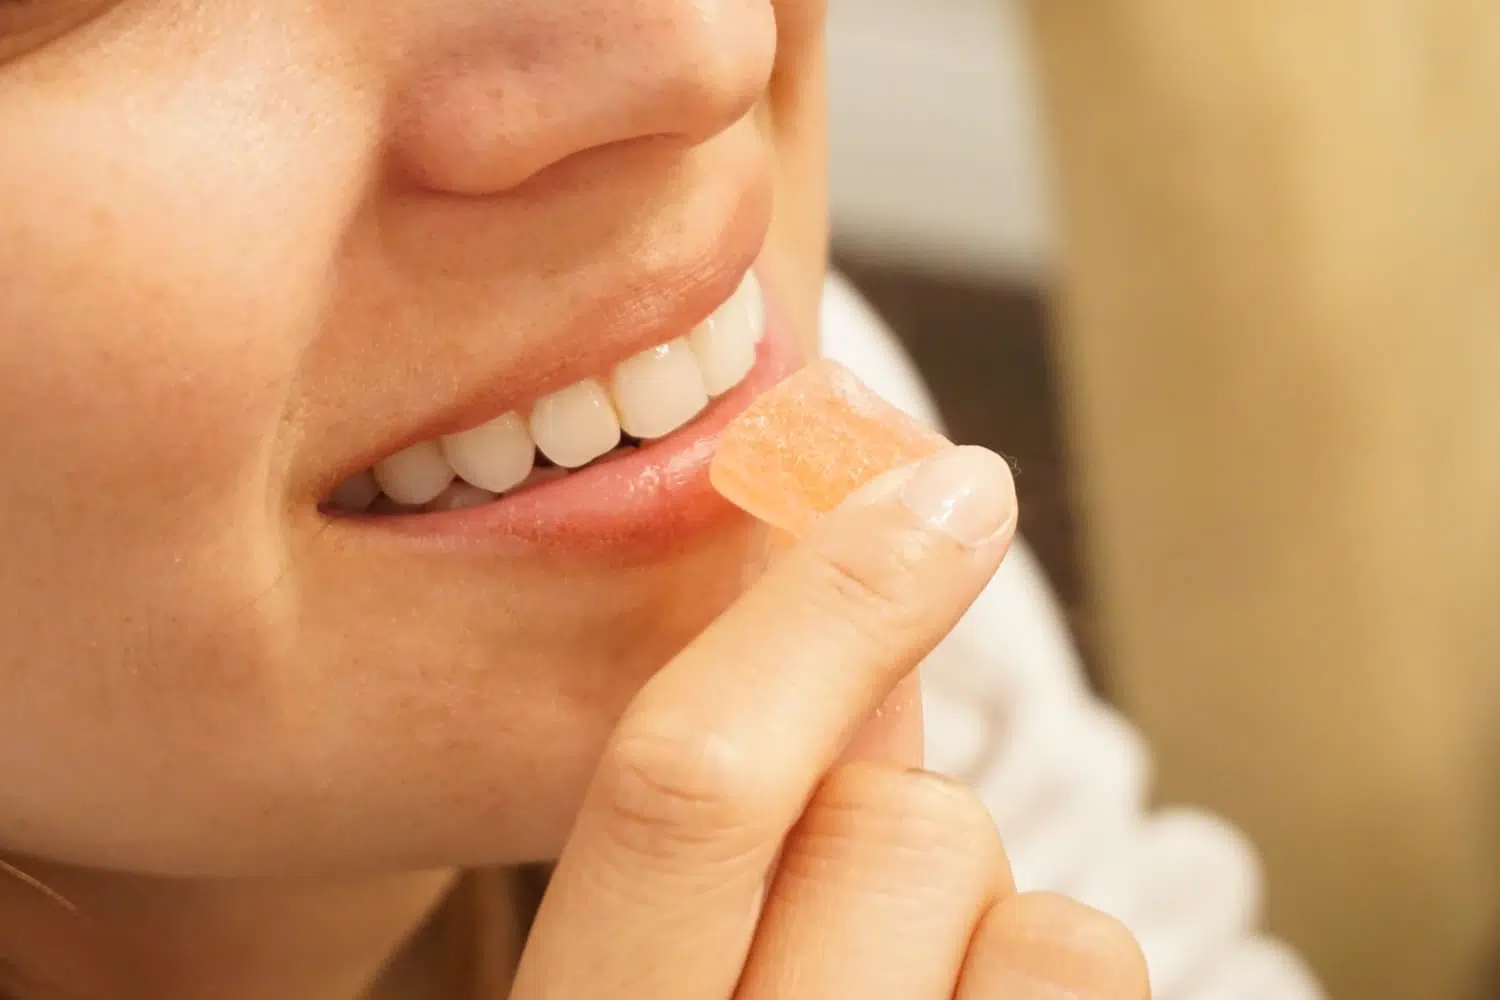 woman about to eat a square light orange gummy edible